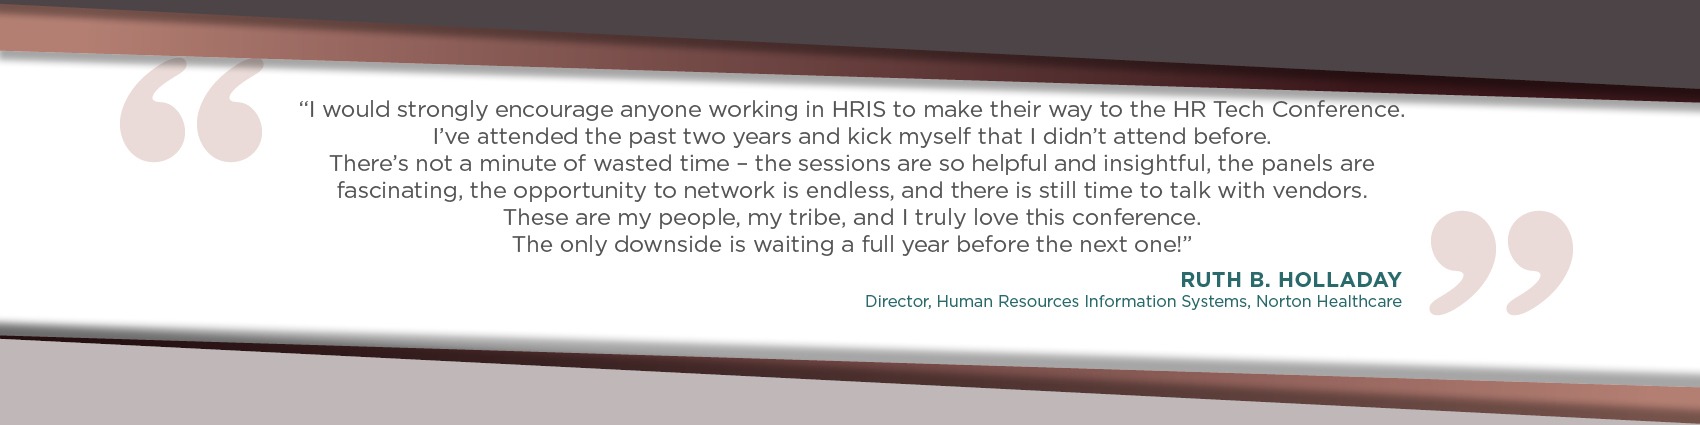 I would strongly encourage anyone working in HRIS to make their way to the HR Tech Conference. I’ve attended the past two years and kick myself that I didn’t attend before. There’s not a minute of wasted time – the sessions are so helpful and insightful, the panels are fascinating, the opportunity to network is endless, and there is still time to talk with vendors. These are my people, my tribe, and I truly love this conference. The only downside is waiting a full year before the next one! - Ruth B. Holladay